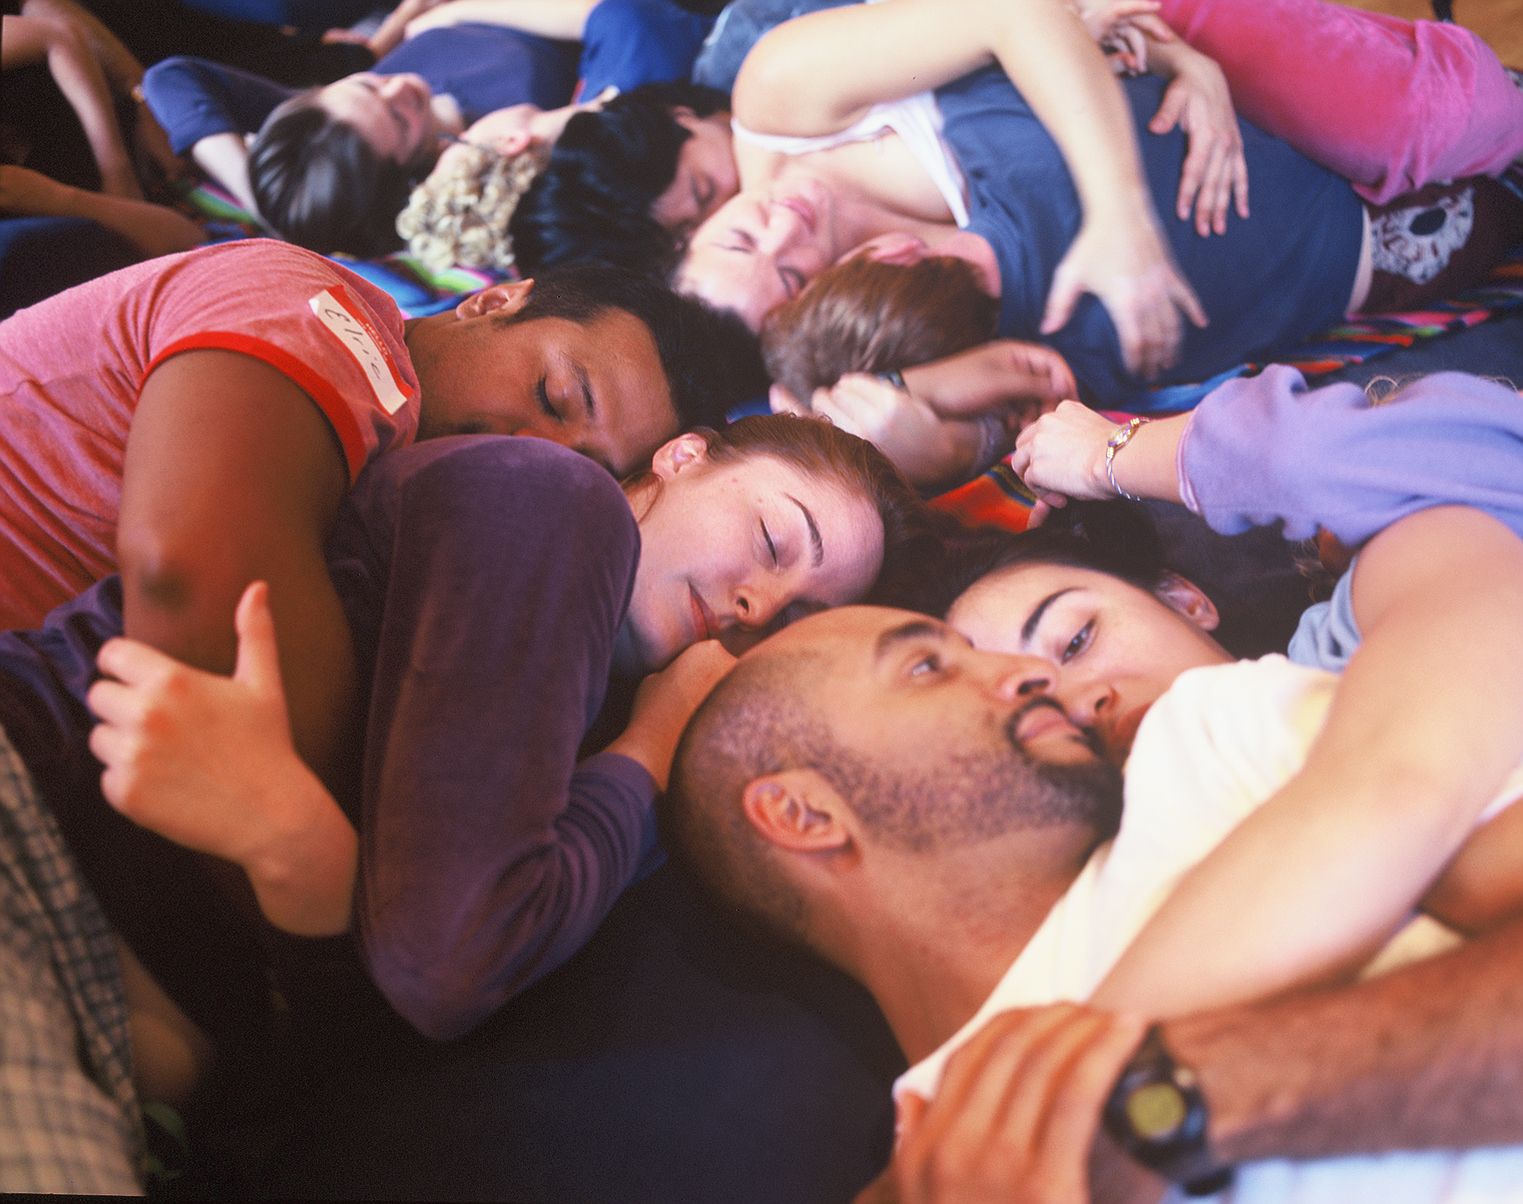 Cuddle Party image of a dozen people cuddling and talking